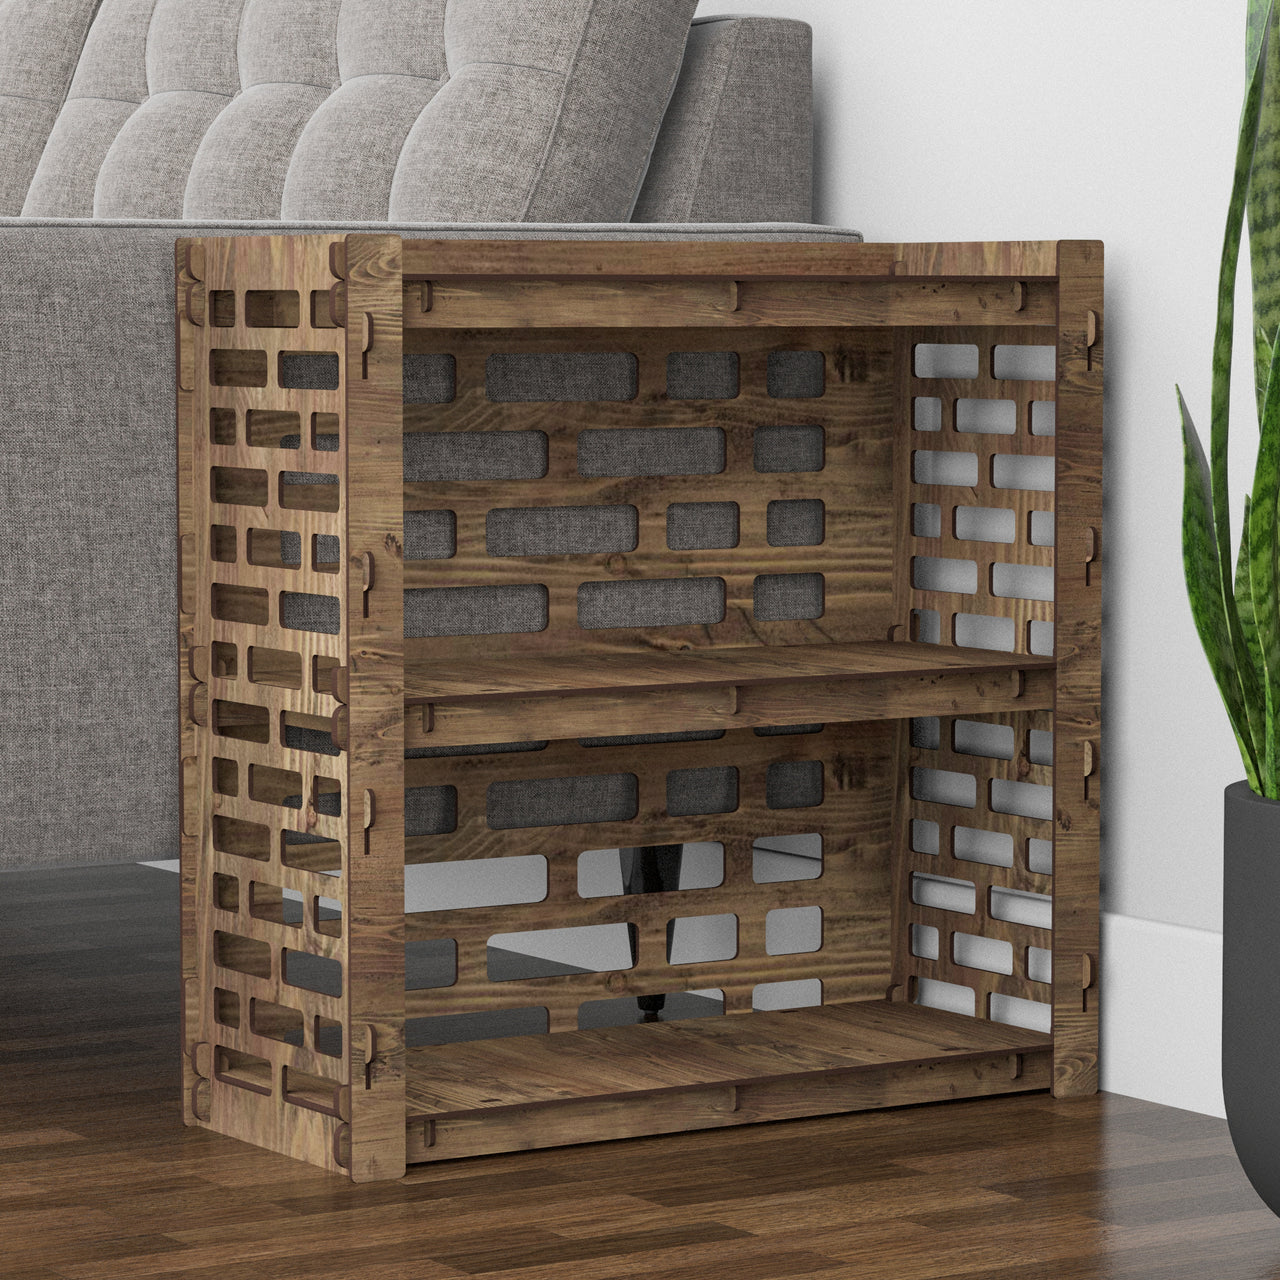 Brickwall Side Table, End Table 2 Drawers [2 SMALL GRAY BINS]